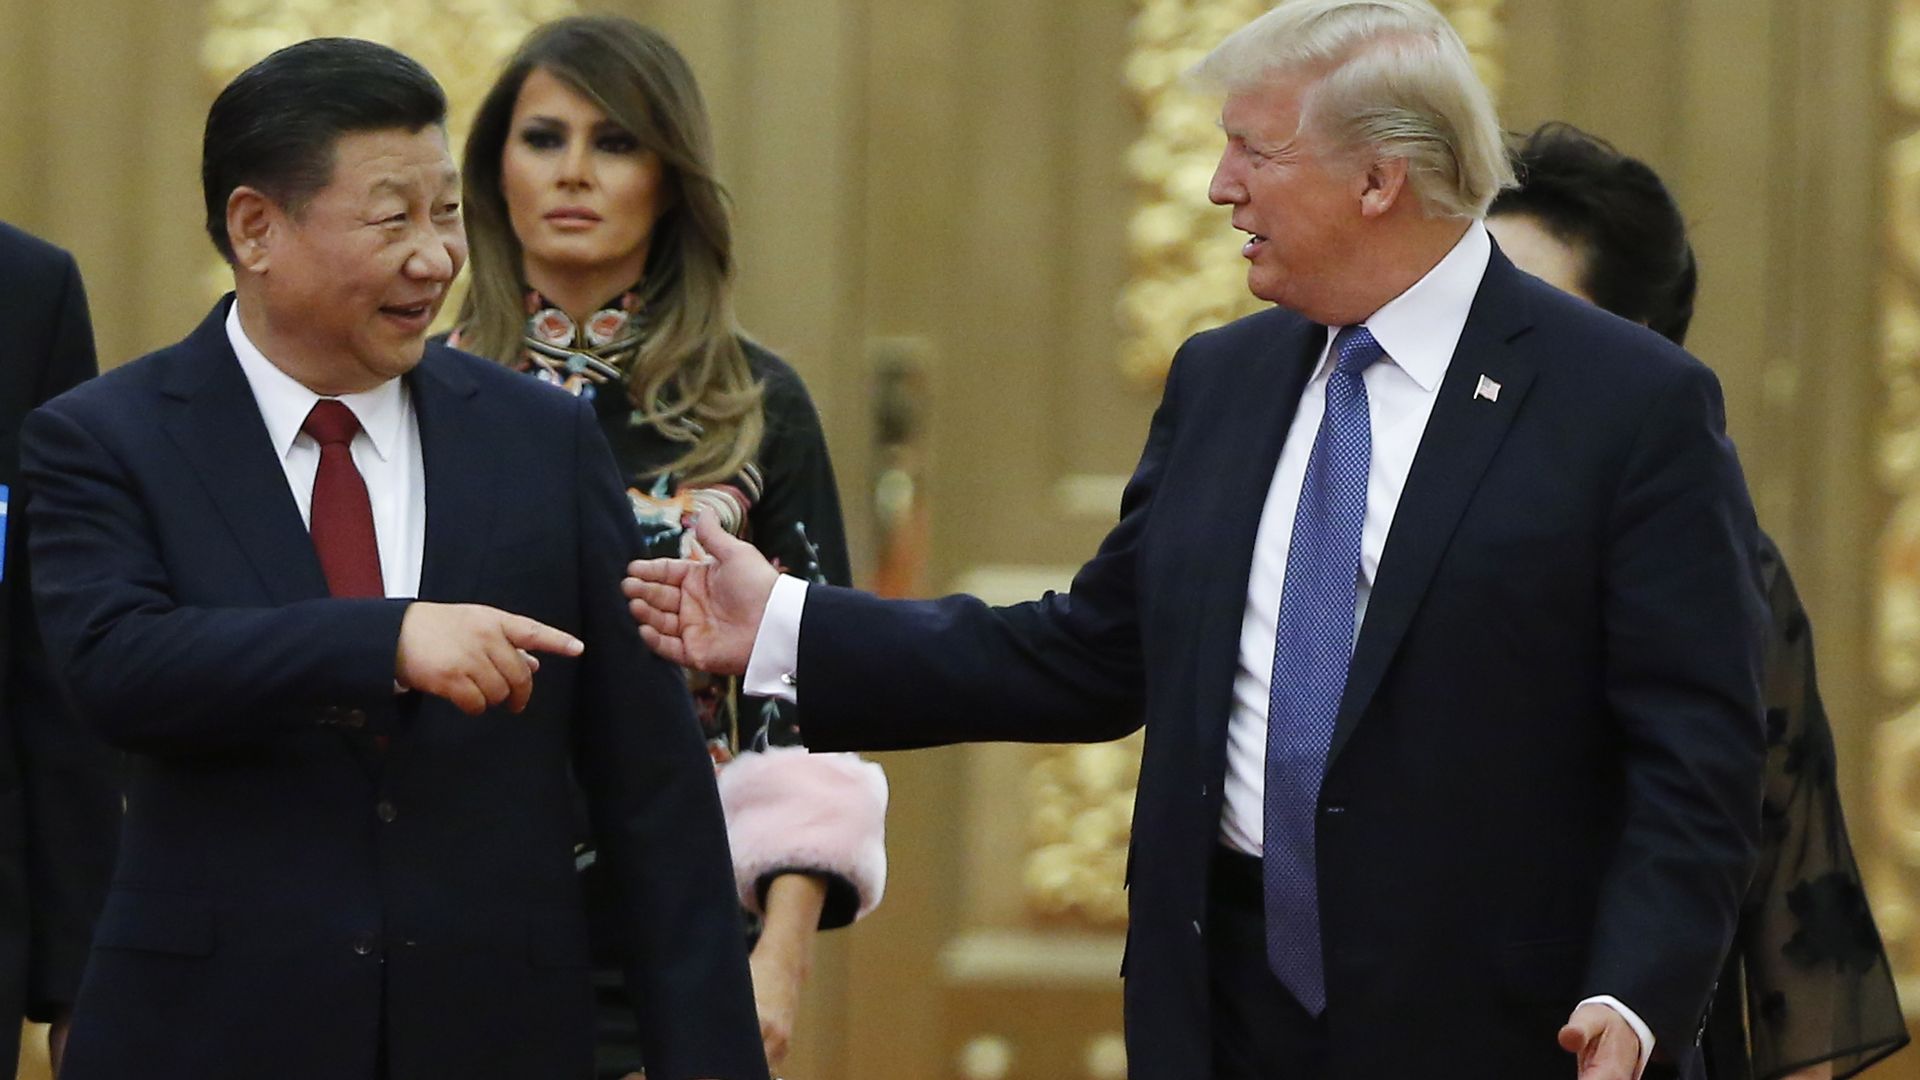 Trump and Xi JingPin gesture toward one another. Melania Trump is in the background. 